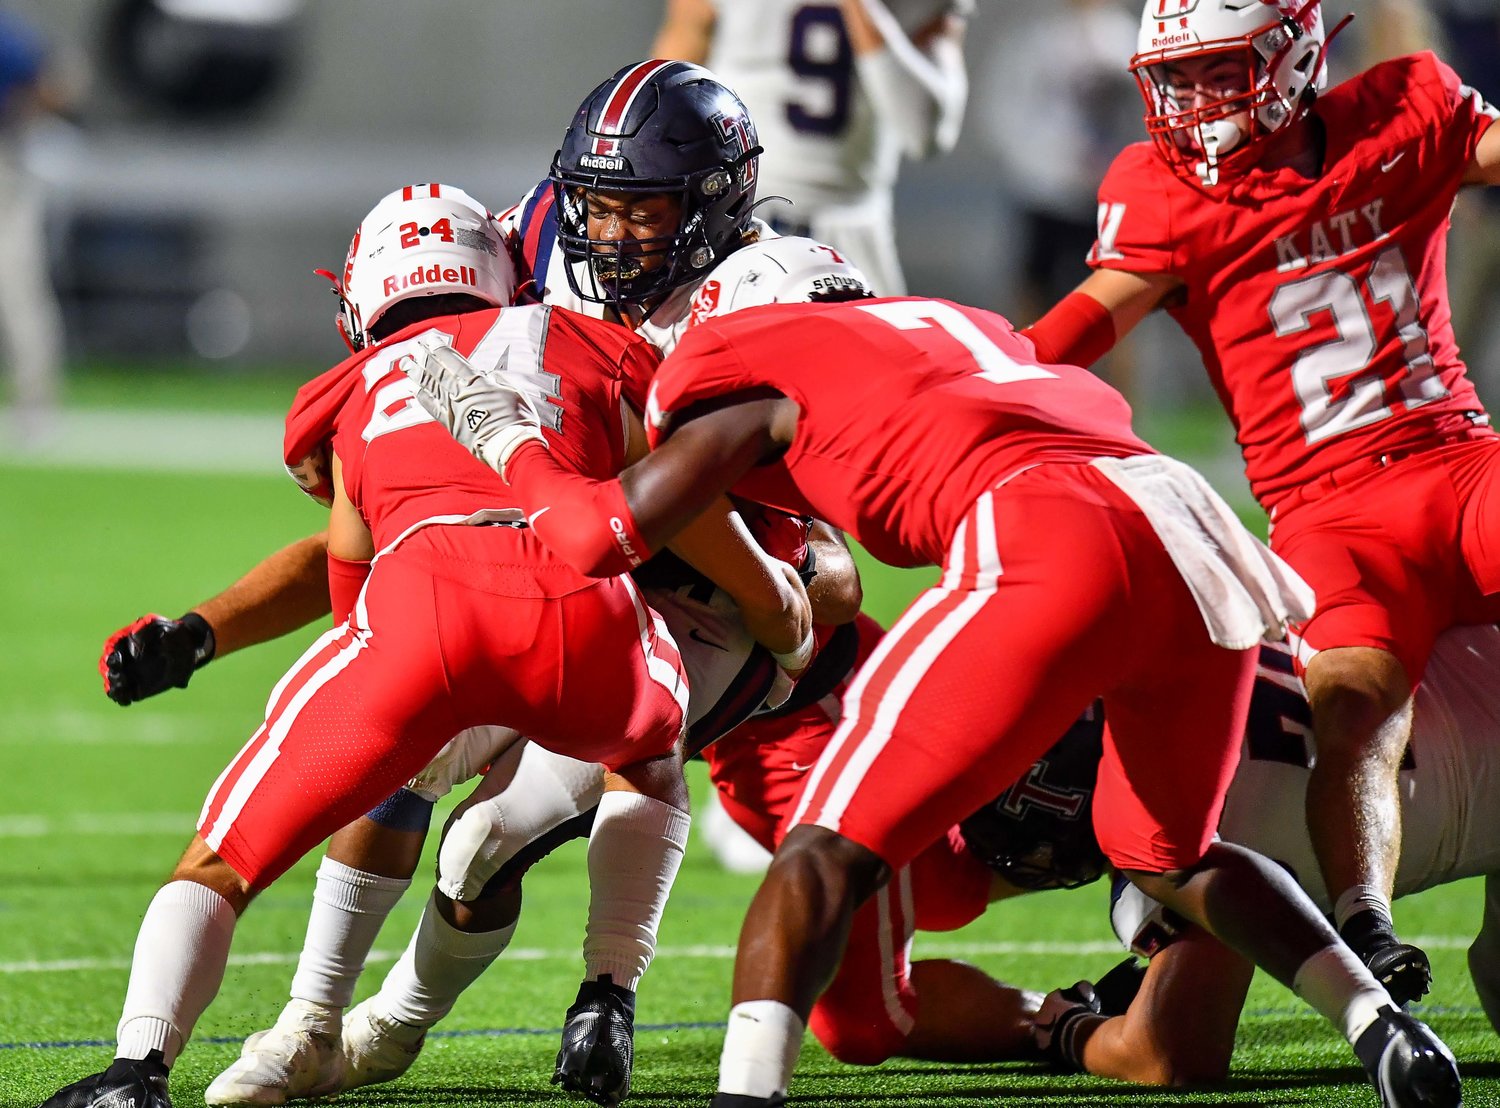 Katy, Tx. Oct 1, 2021:  On a fourth and goal, Katy's defense holds off Tompkins from scoring during a conference game between Katy Tigers and Tompkins Tompkins Falcons at Legacy Stadium. (Photo by Mark Goodman / Katy Times)